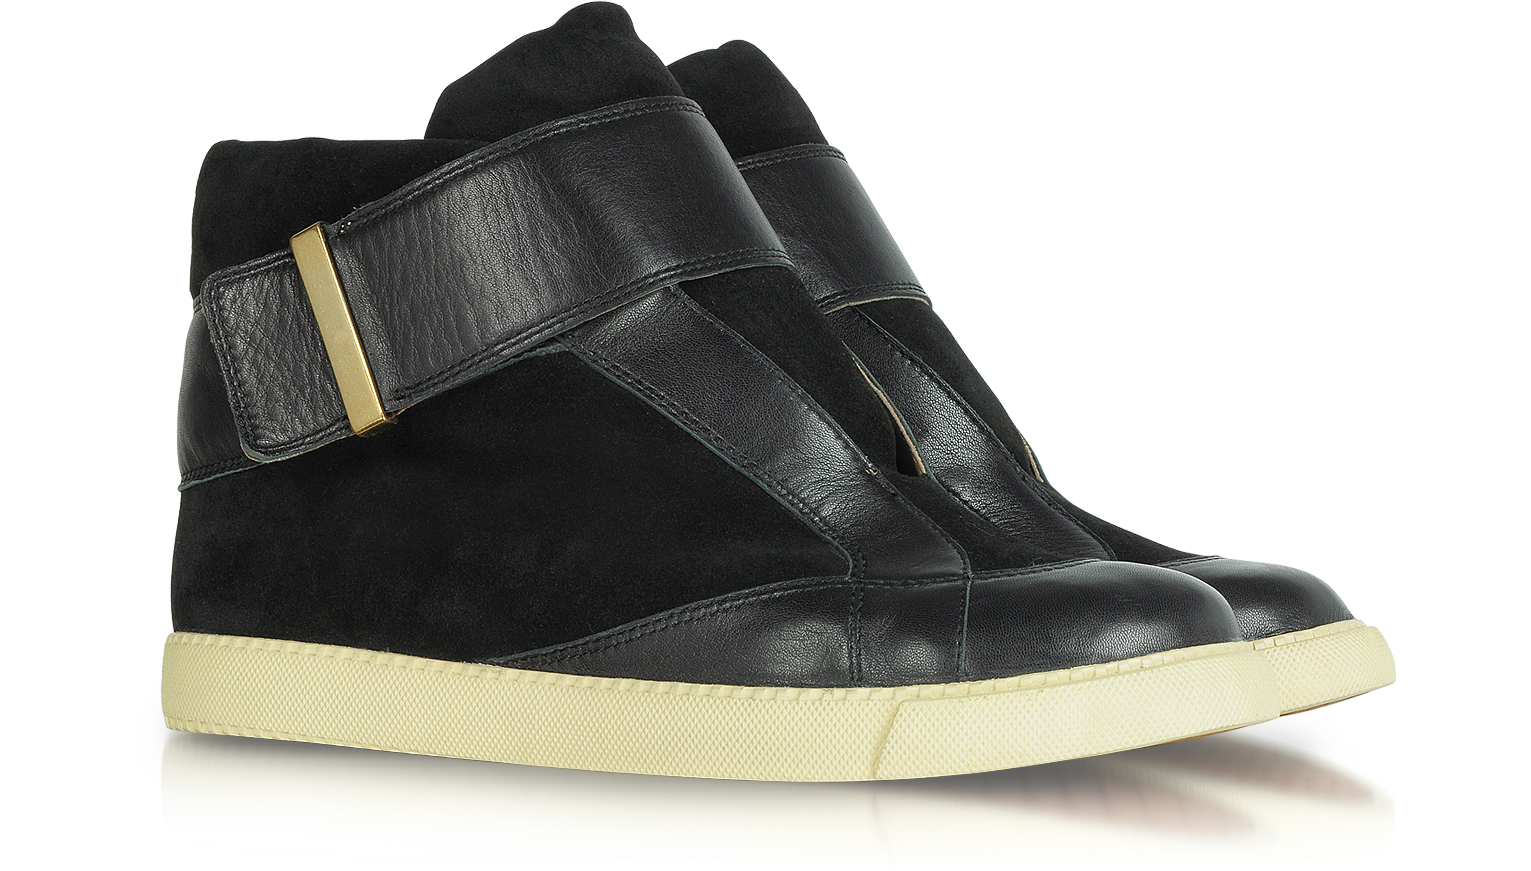 See by Chloé Sami Black Suede and Leather Sneakers 36 IT/EU at FORZIERI